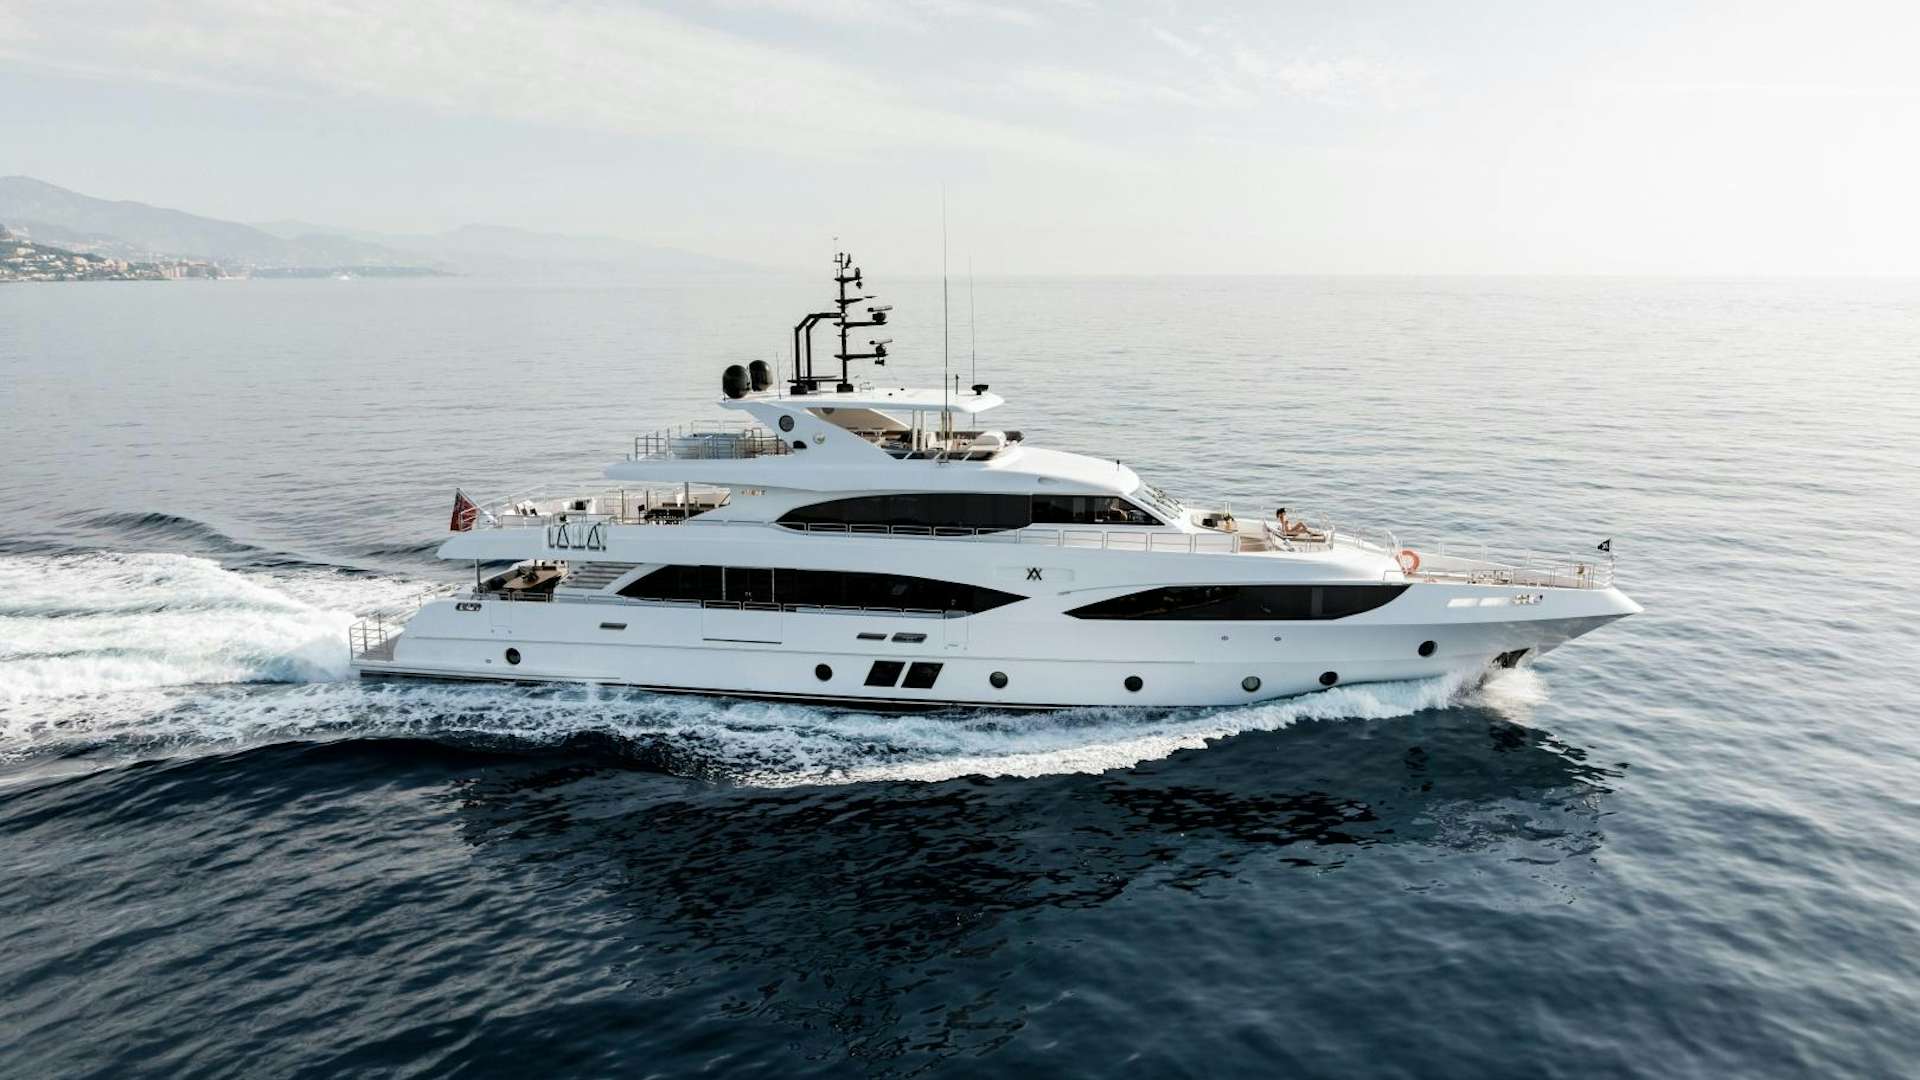 Watch Video for ALTAVITA Yacht for Sale